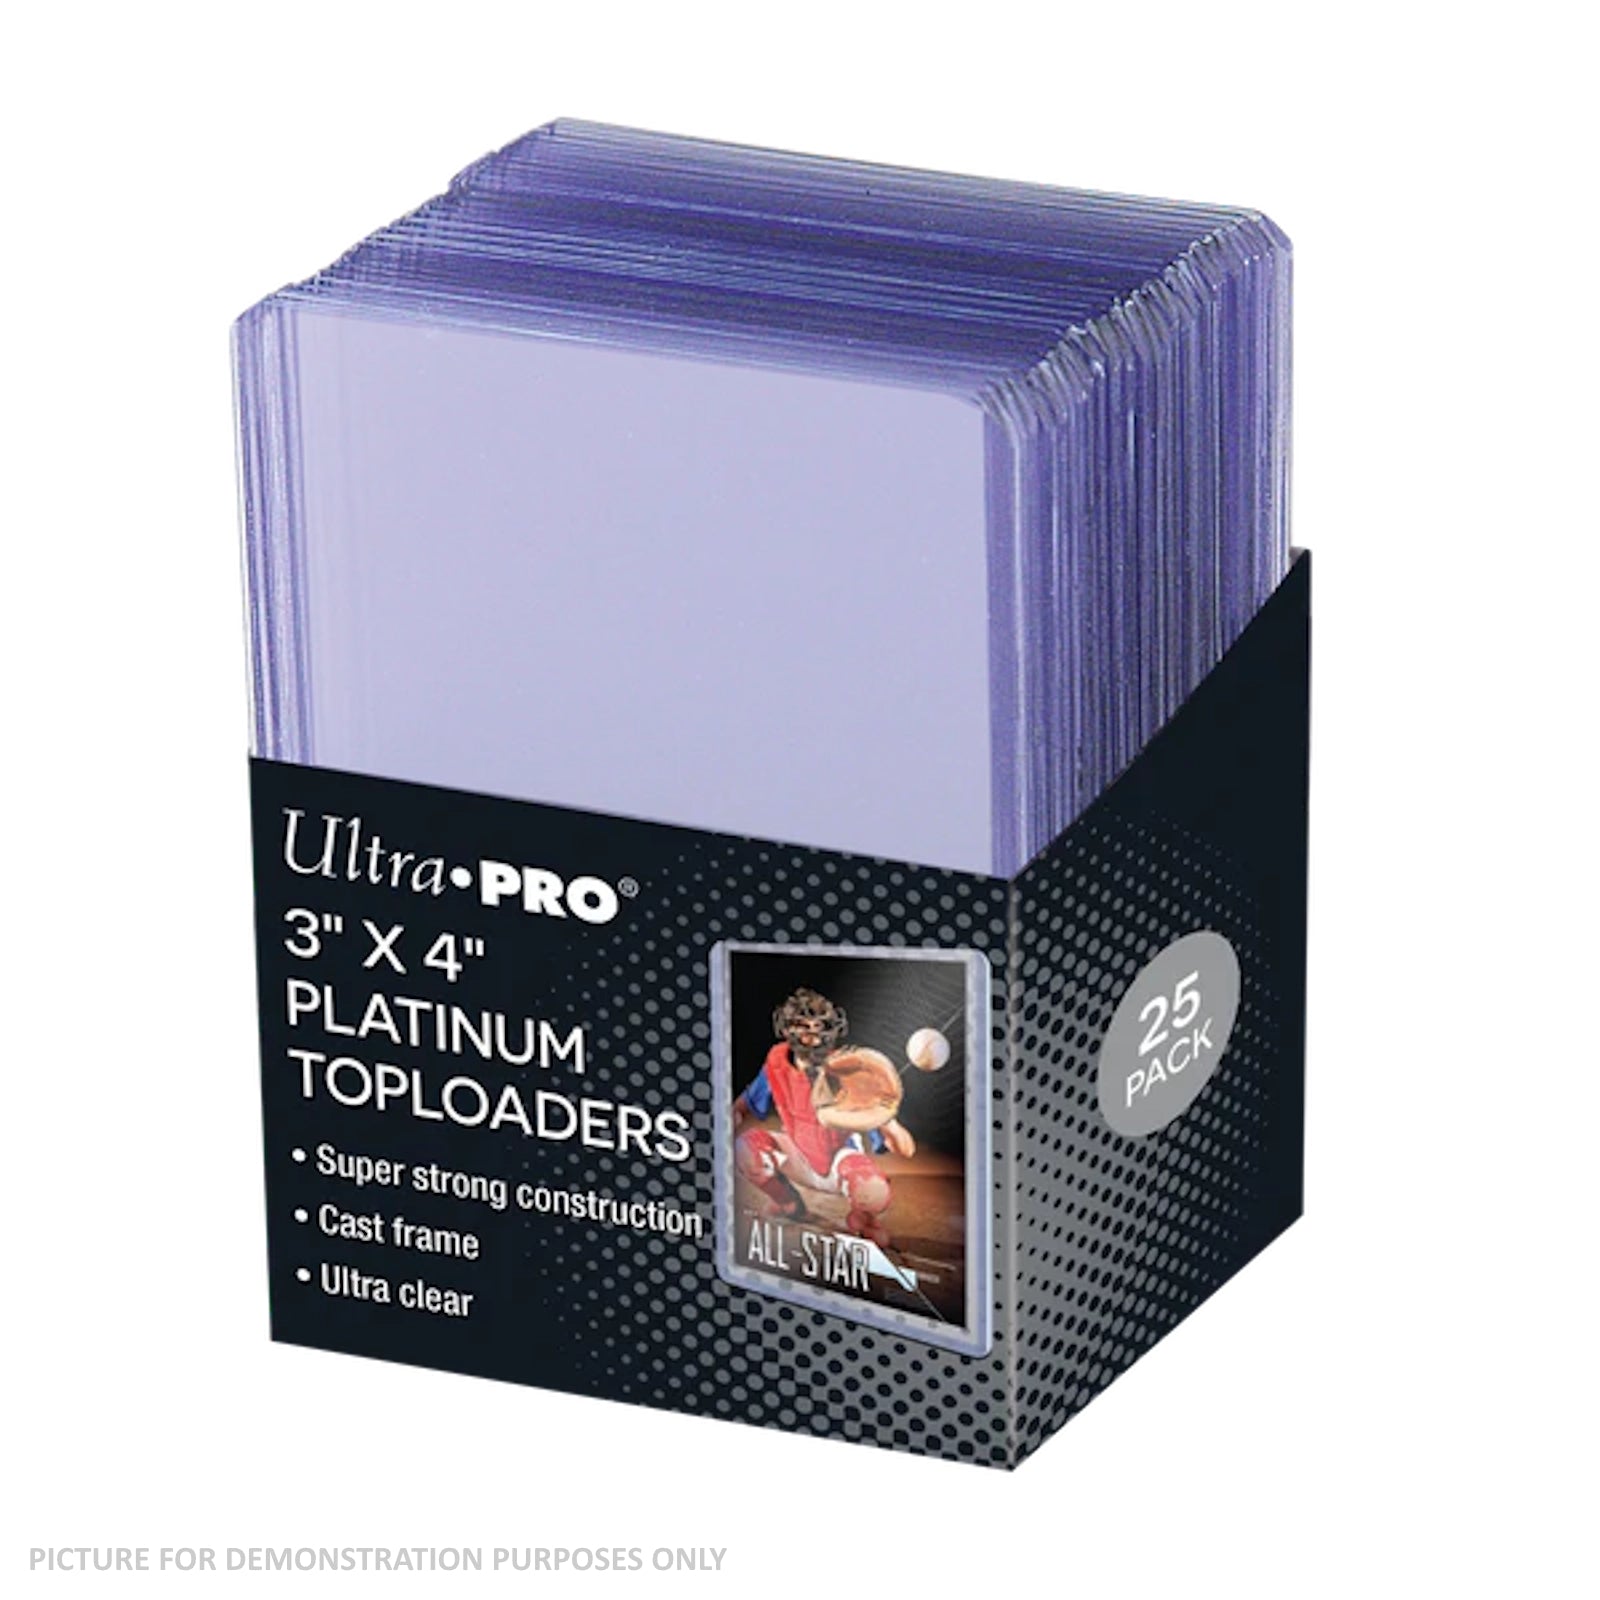 Ultra Pro Ultra Clear Platinum Toploaders 3" X 4" - PACK OF 25